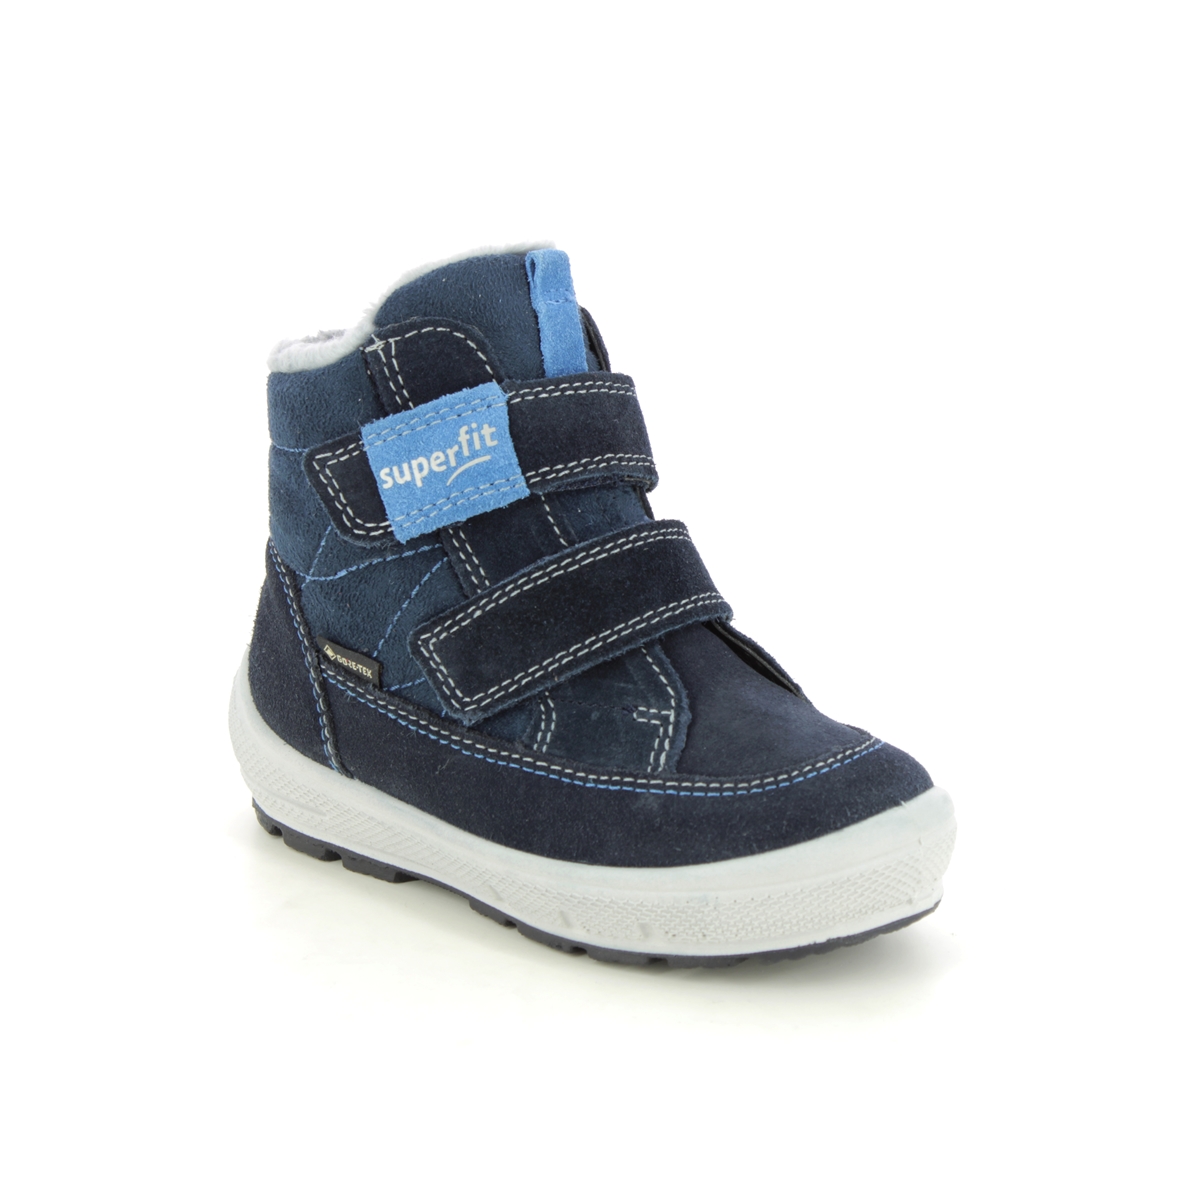 Superfit Groovy Gtx Navy Kids Toddler Boys Boots 1009314-8000 In Size 24 In Plain Navy